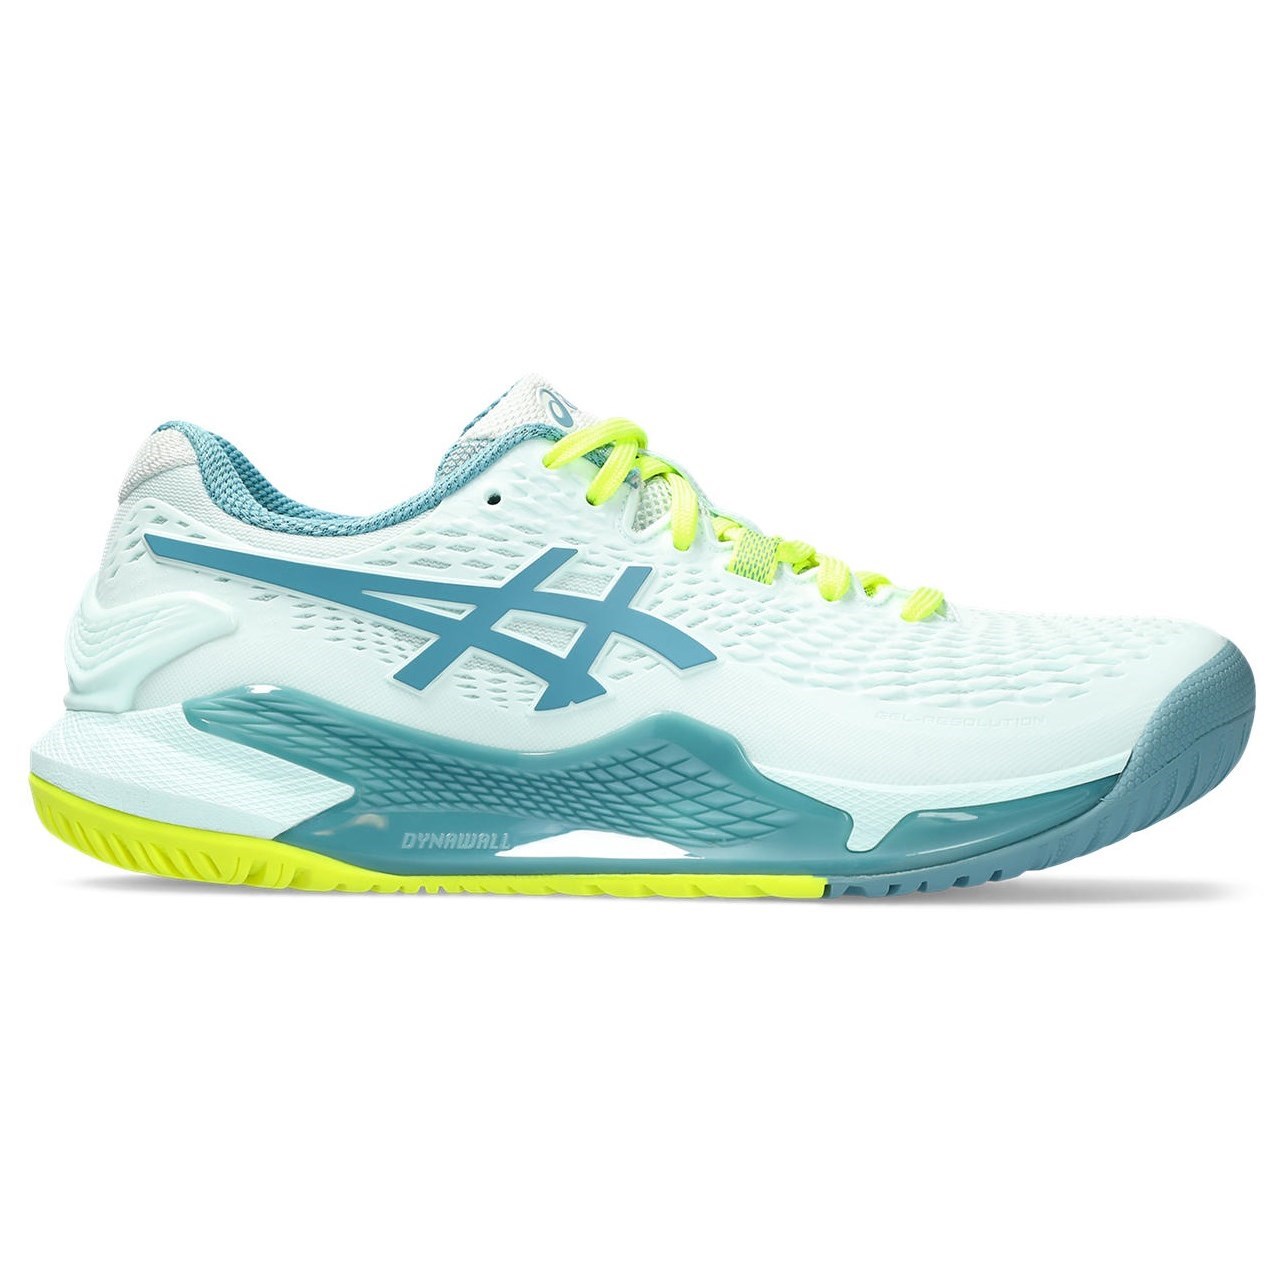 Asics Gel Resolution 9 - Womens Tennis Shoes - Soothing Sea/Gris Blue ...